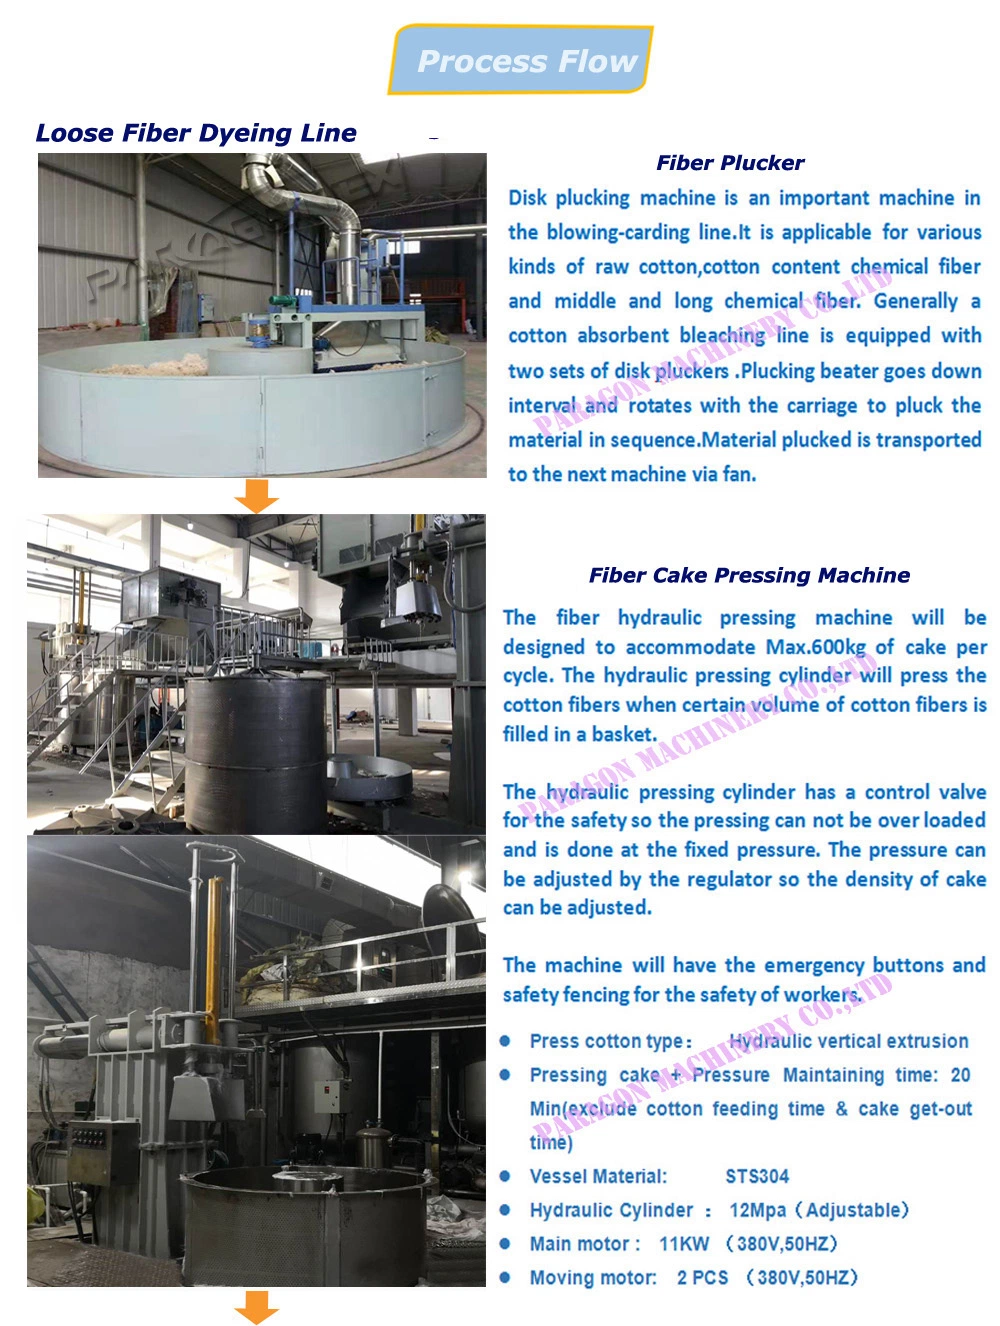 Factory High Quality Automatic Fiber Cake Opening and Feeding Machine for Loose Fiber Dyeing